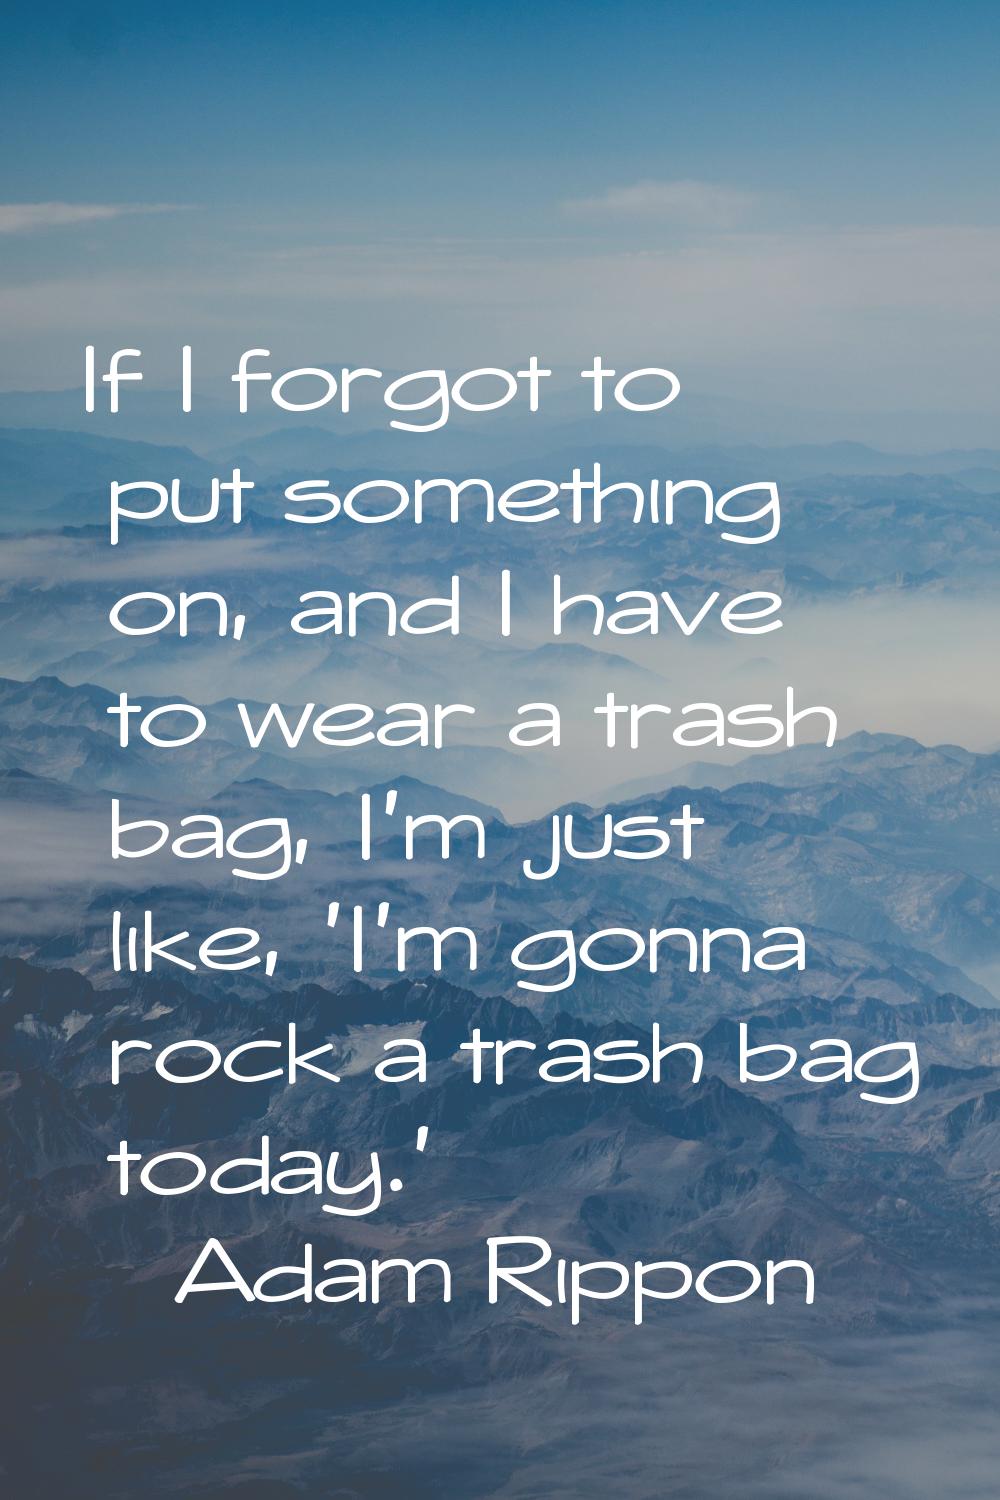 If I forgot to put something on, and I have to wear a trash bag, I'm just like, 'I'm gonna rock a t